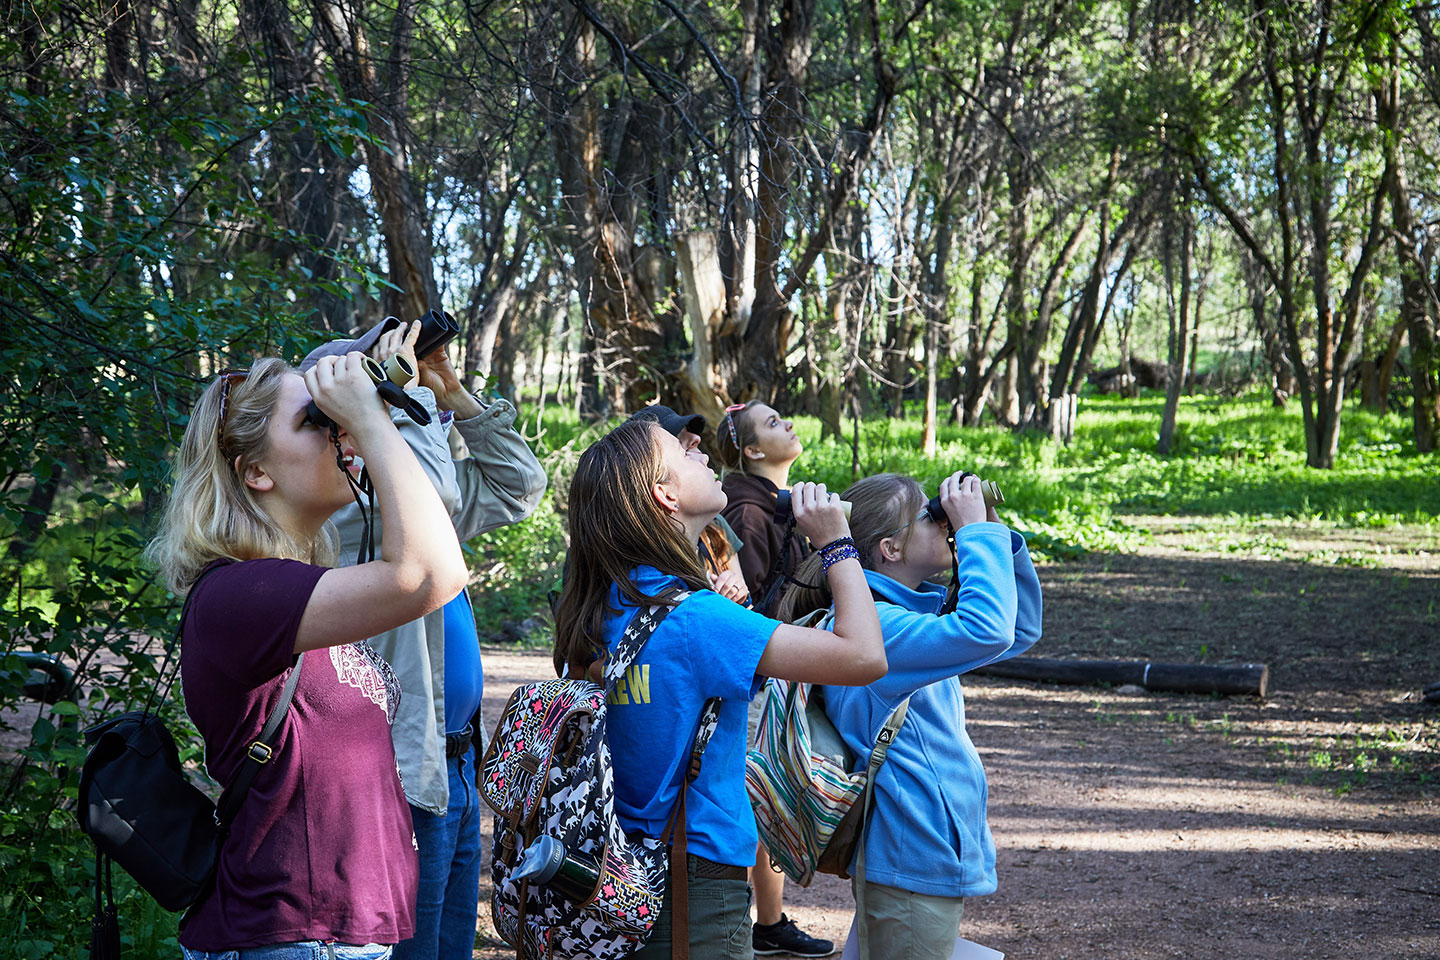 Zoo guests at a EdVenture program in the forest using binoculars